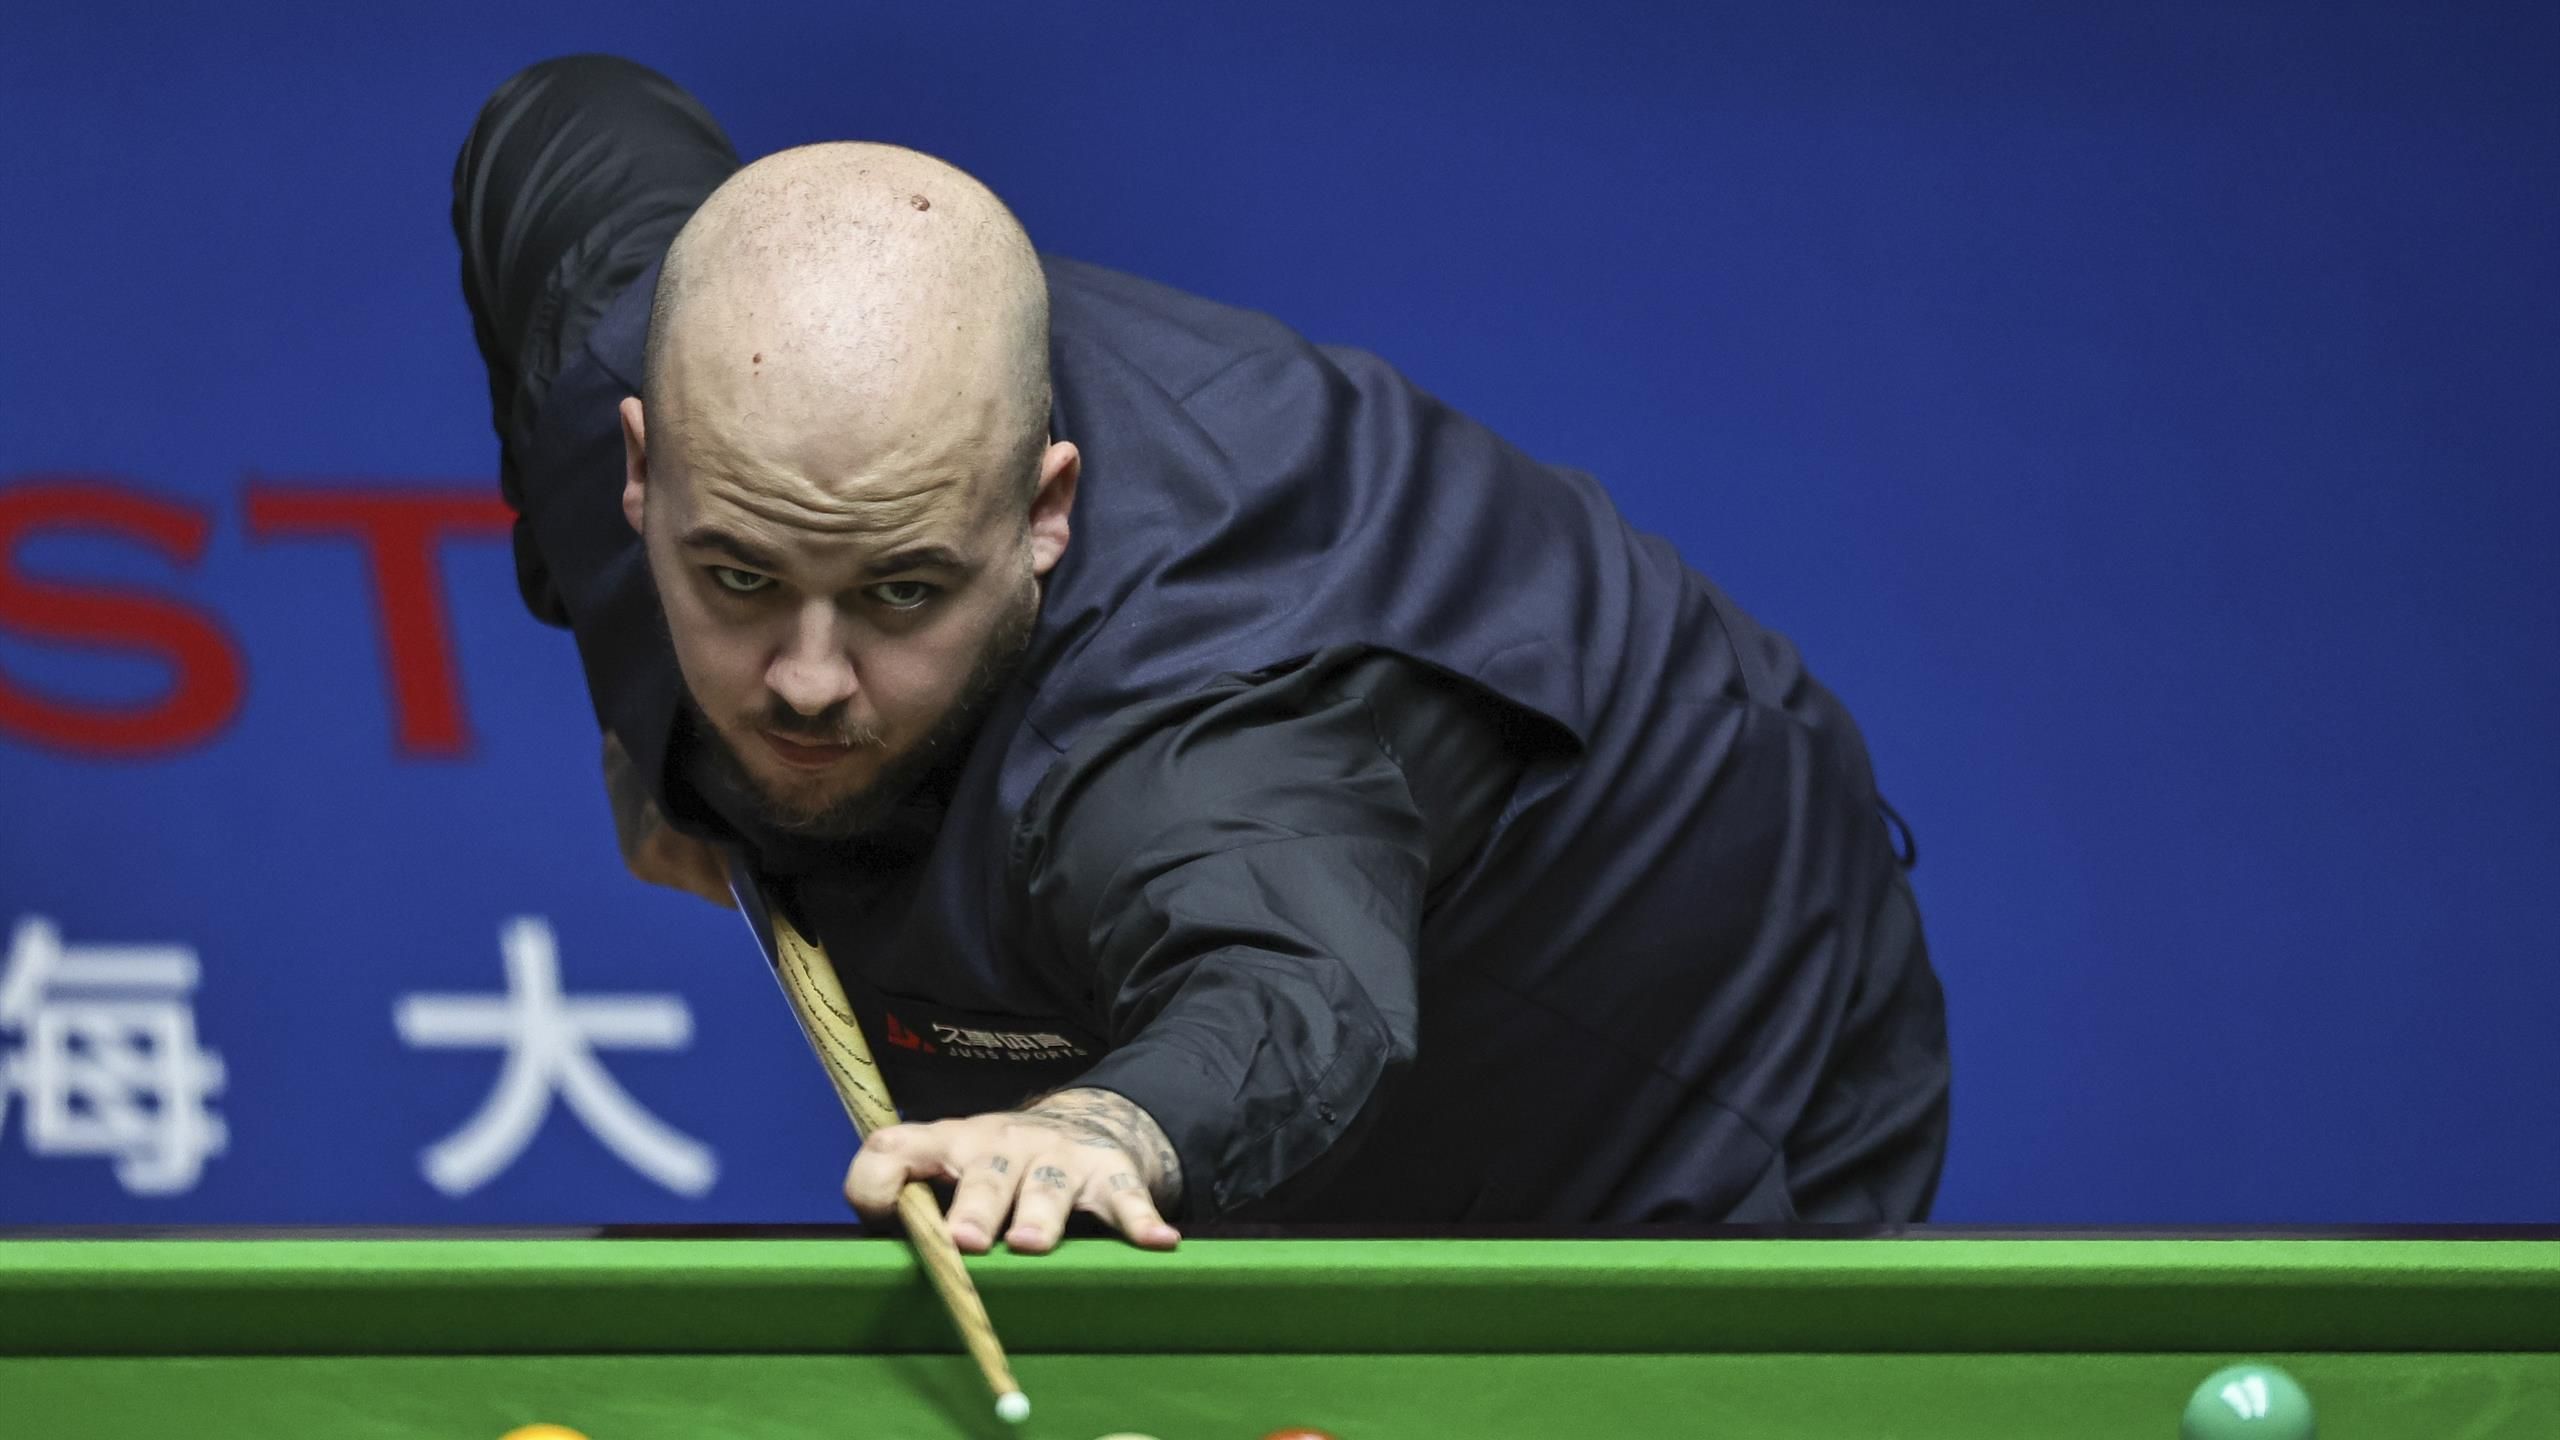 Luca Brecel squeezes past Neil Robertson to set up Ronnie OSullivan clash in final of Shanghai Masters